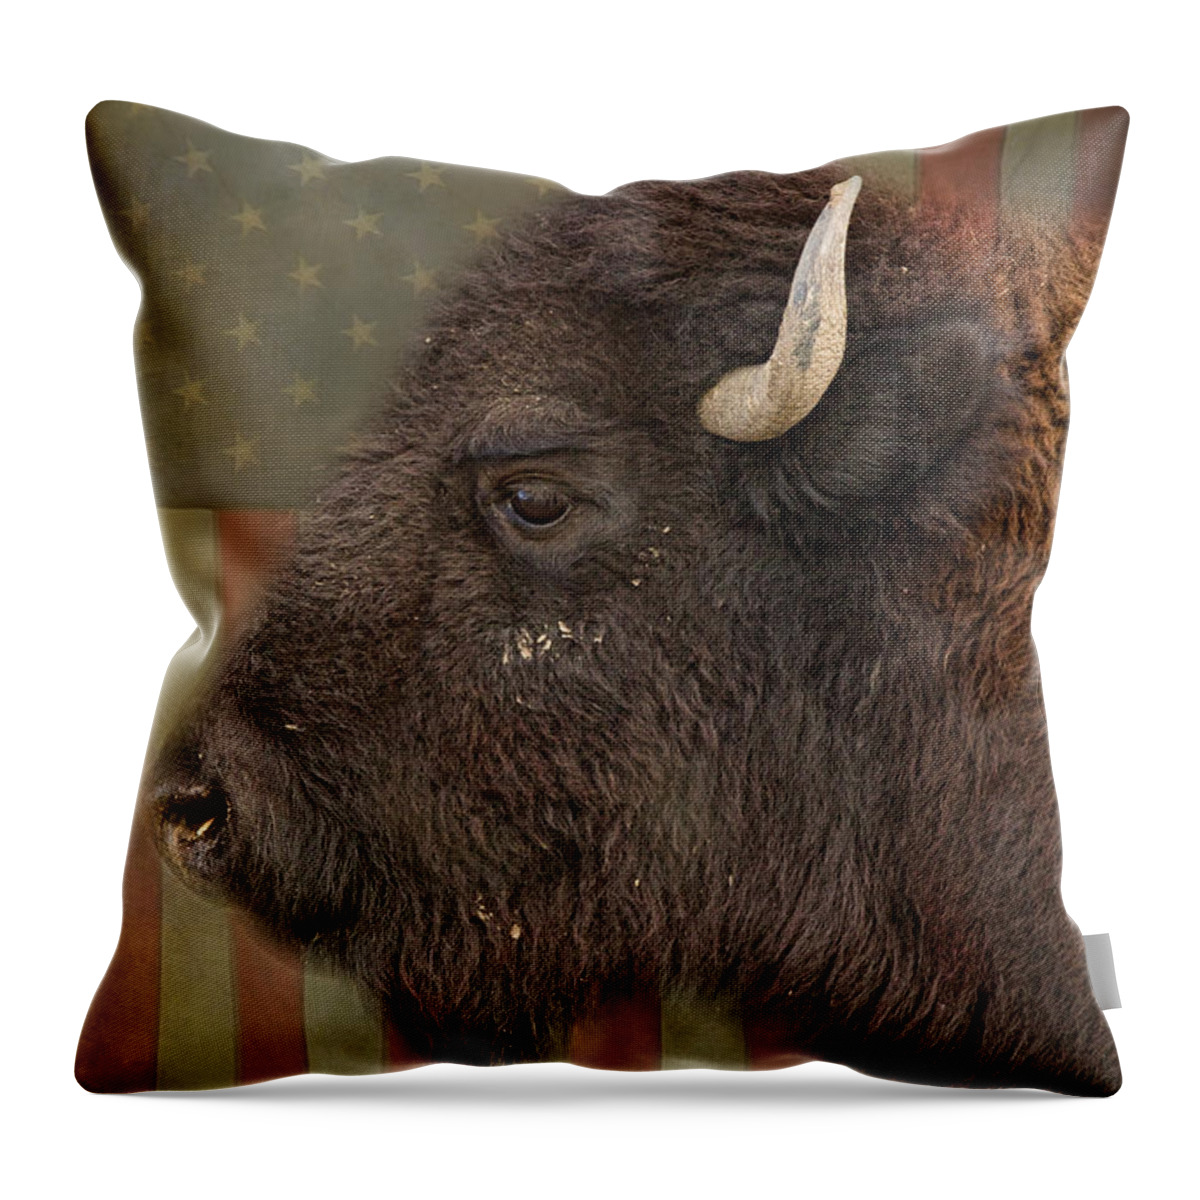 Bison Throw Pillow featuring the photograph American Bison Headshot Profile by James BO Insogna